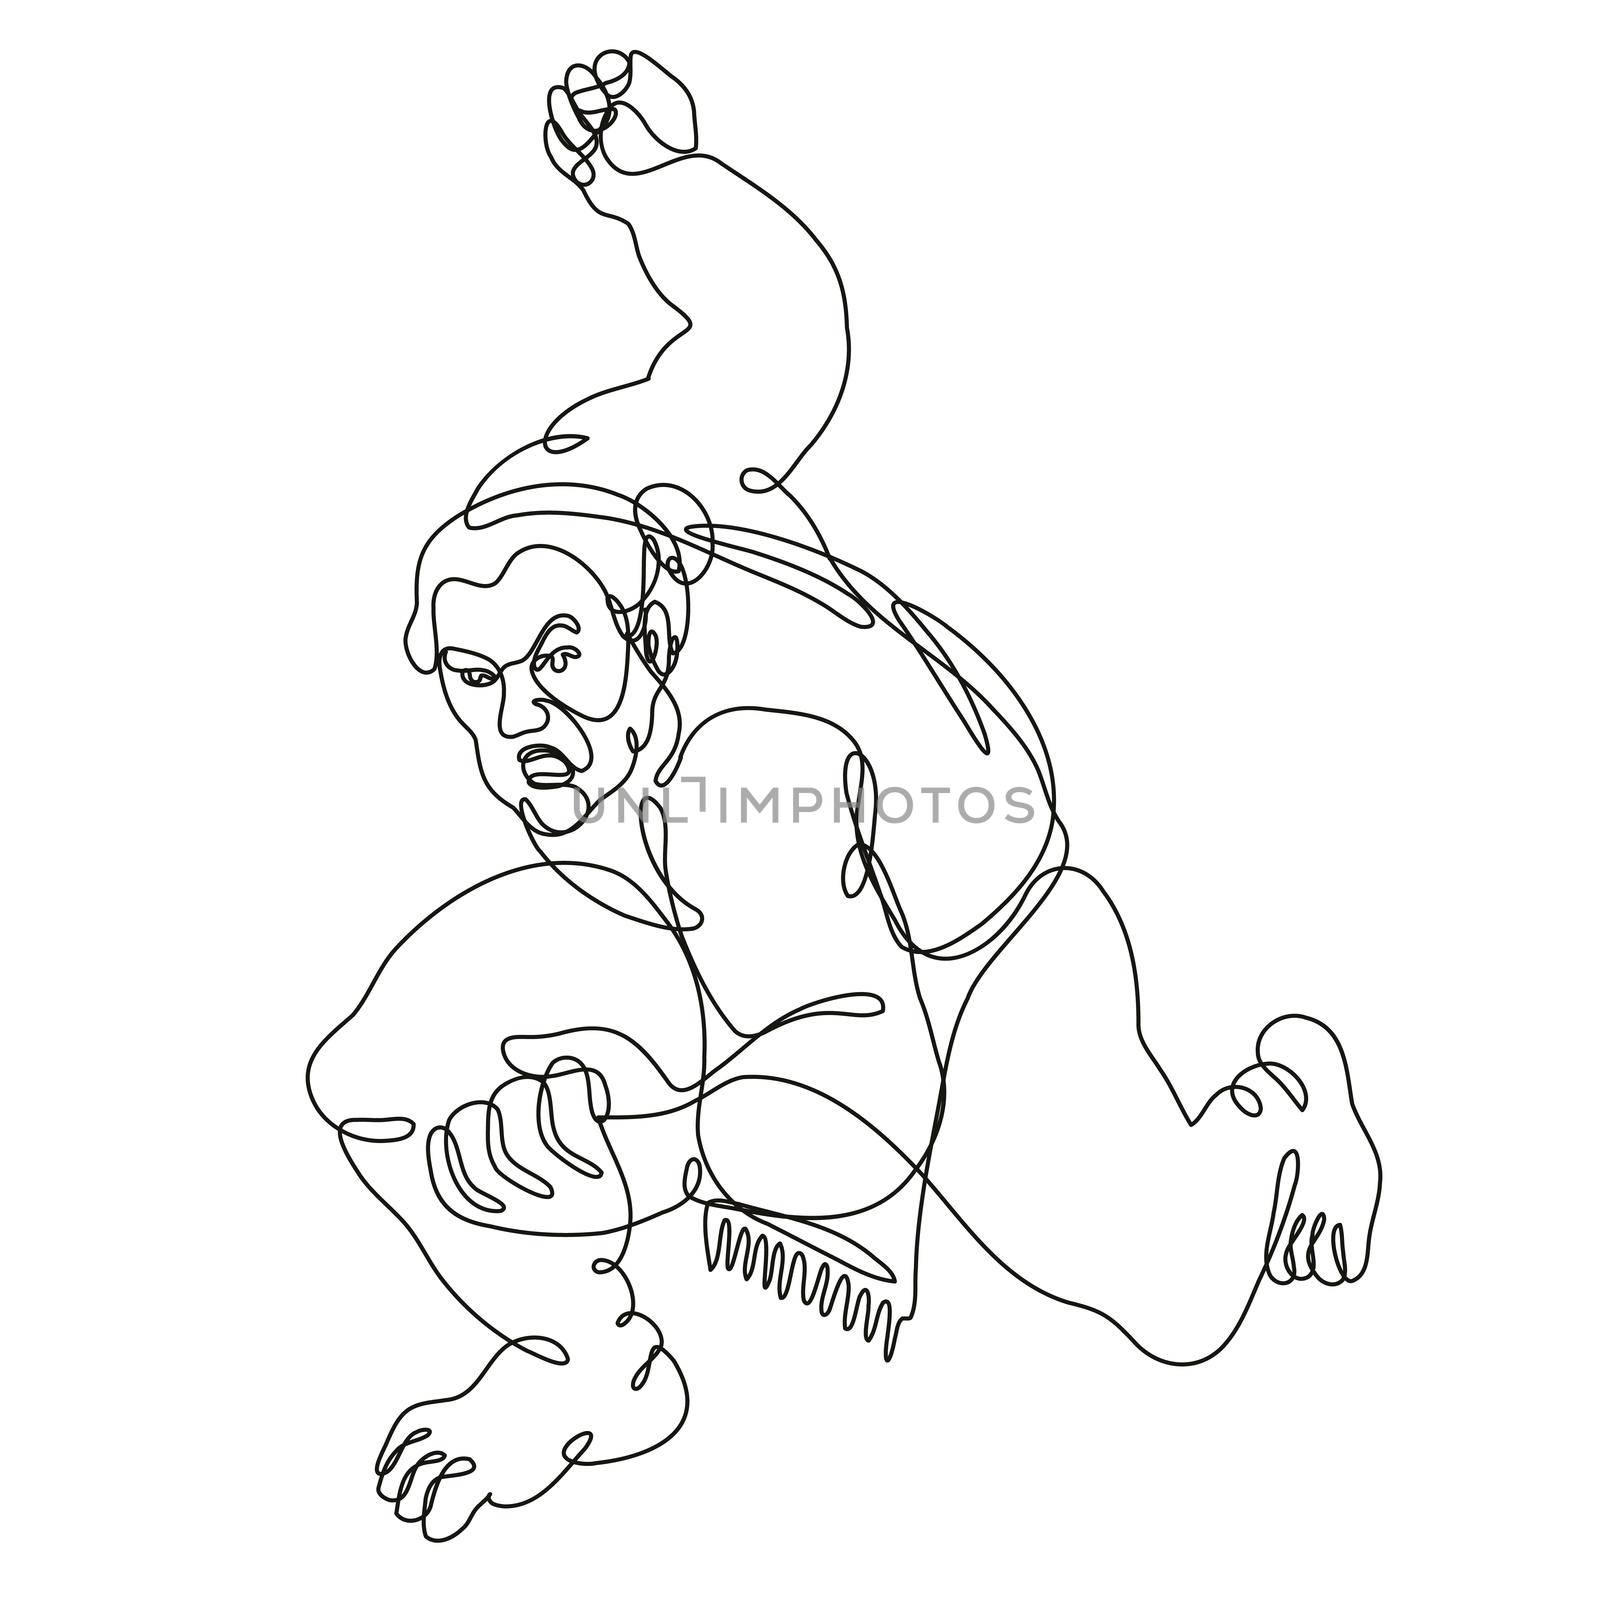 Continuous line drawing illustration of a sumo wrestler or rikishi in fighting stance front view done in mono line or doodle style in black and white on isolated background. 